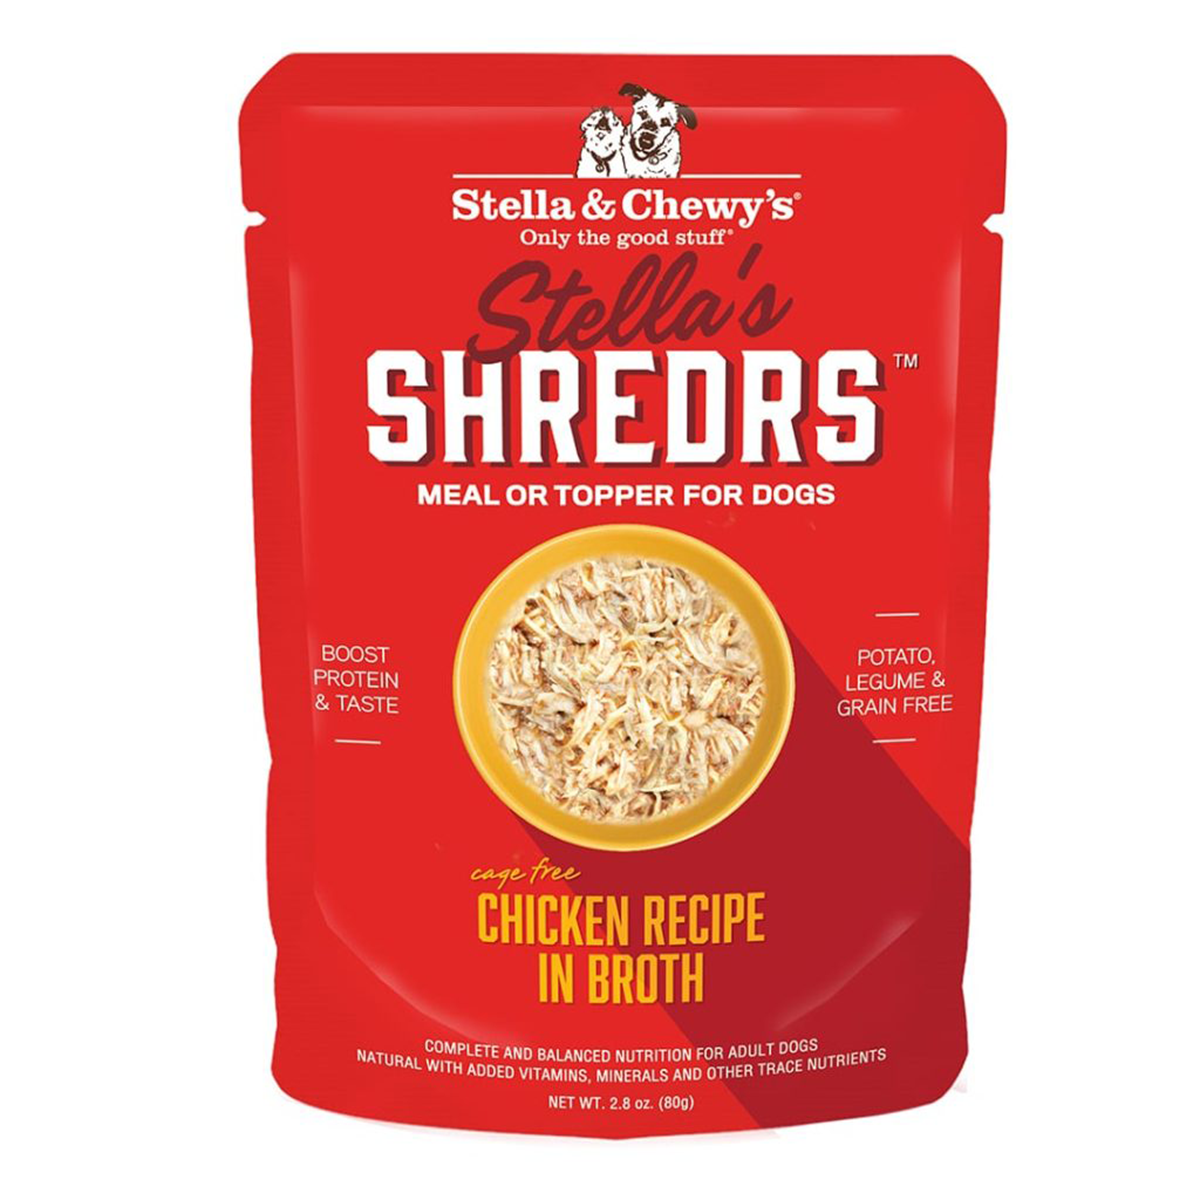 Stella & Chewy's Shredrs Dog Meal Topper - Chicken